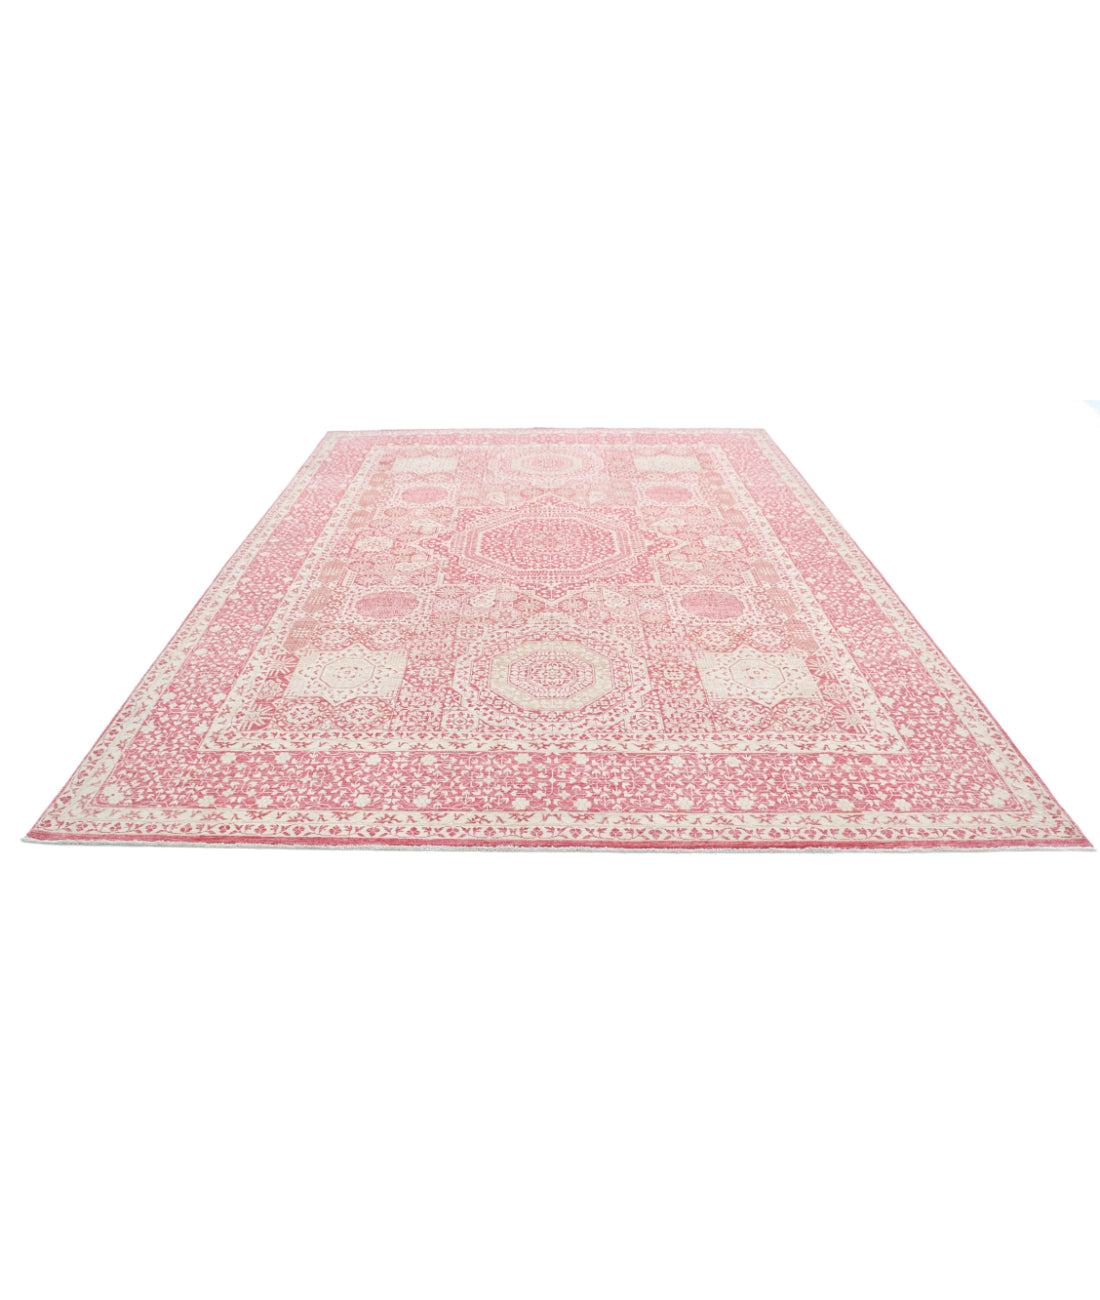 Hand Knotted Fine Mamluk Wool Rug - 8'10'' x 11'9'' 8'10'' x 11'9'' (265 X 353) / Red / Red